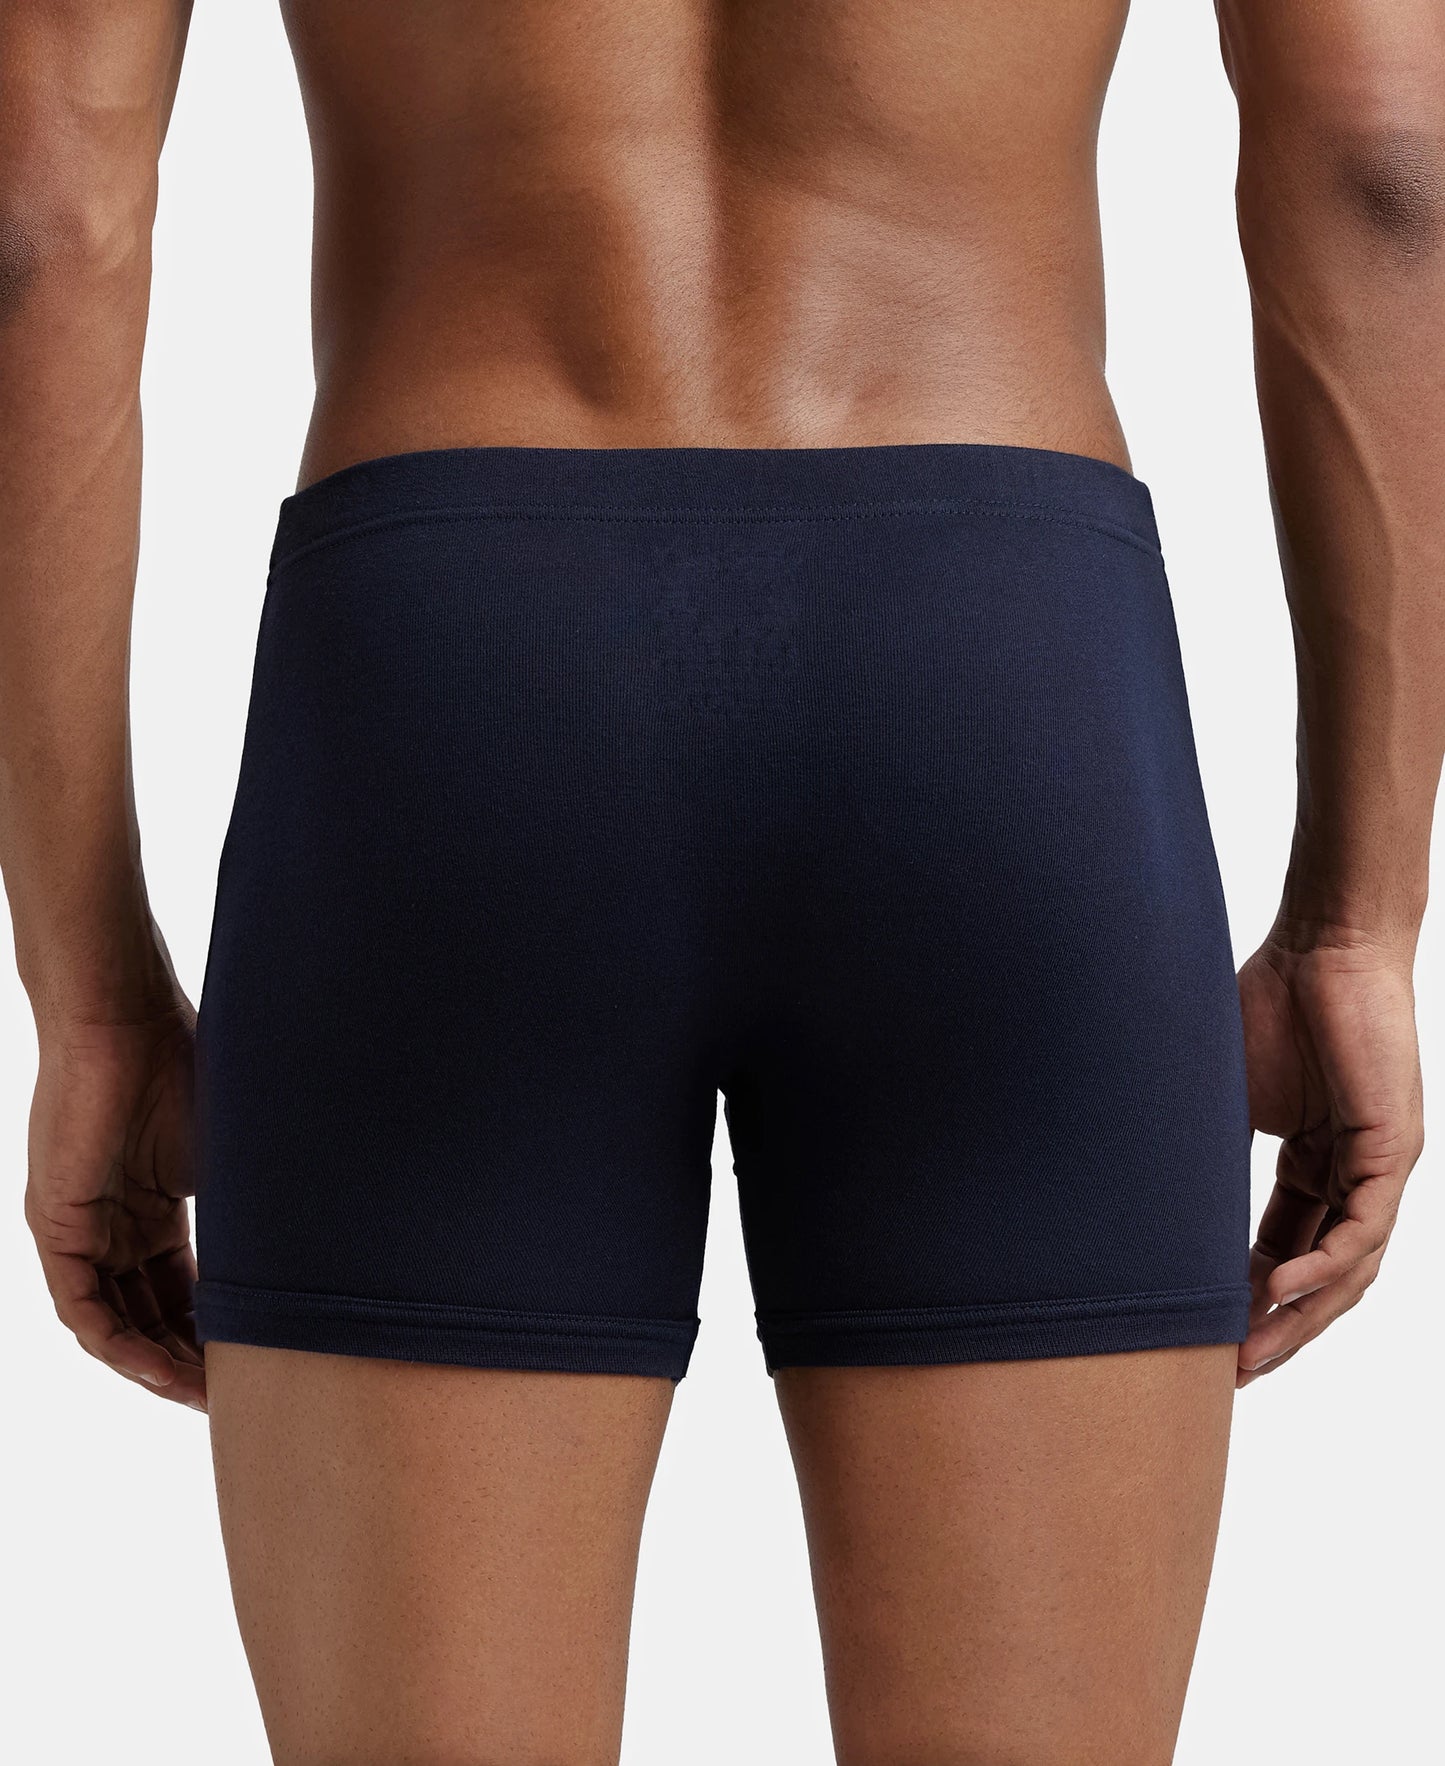 Super Combed Cotton Rib Solid Boxer Brief with Ultrasoft and Durable Waistband - Black/Navy/Charcoal Melange (Pack of 3)-17